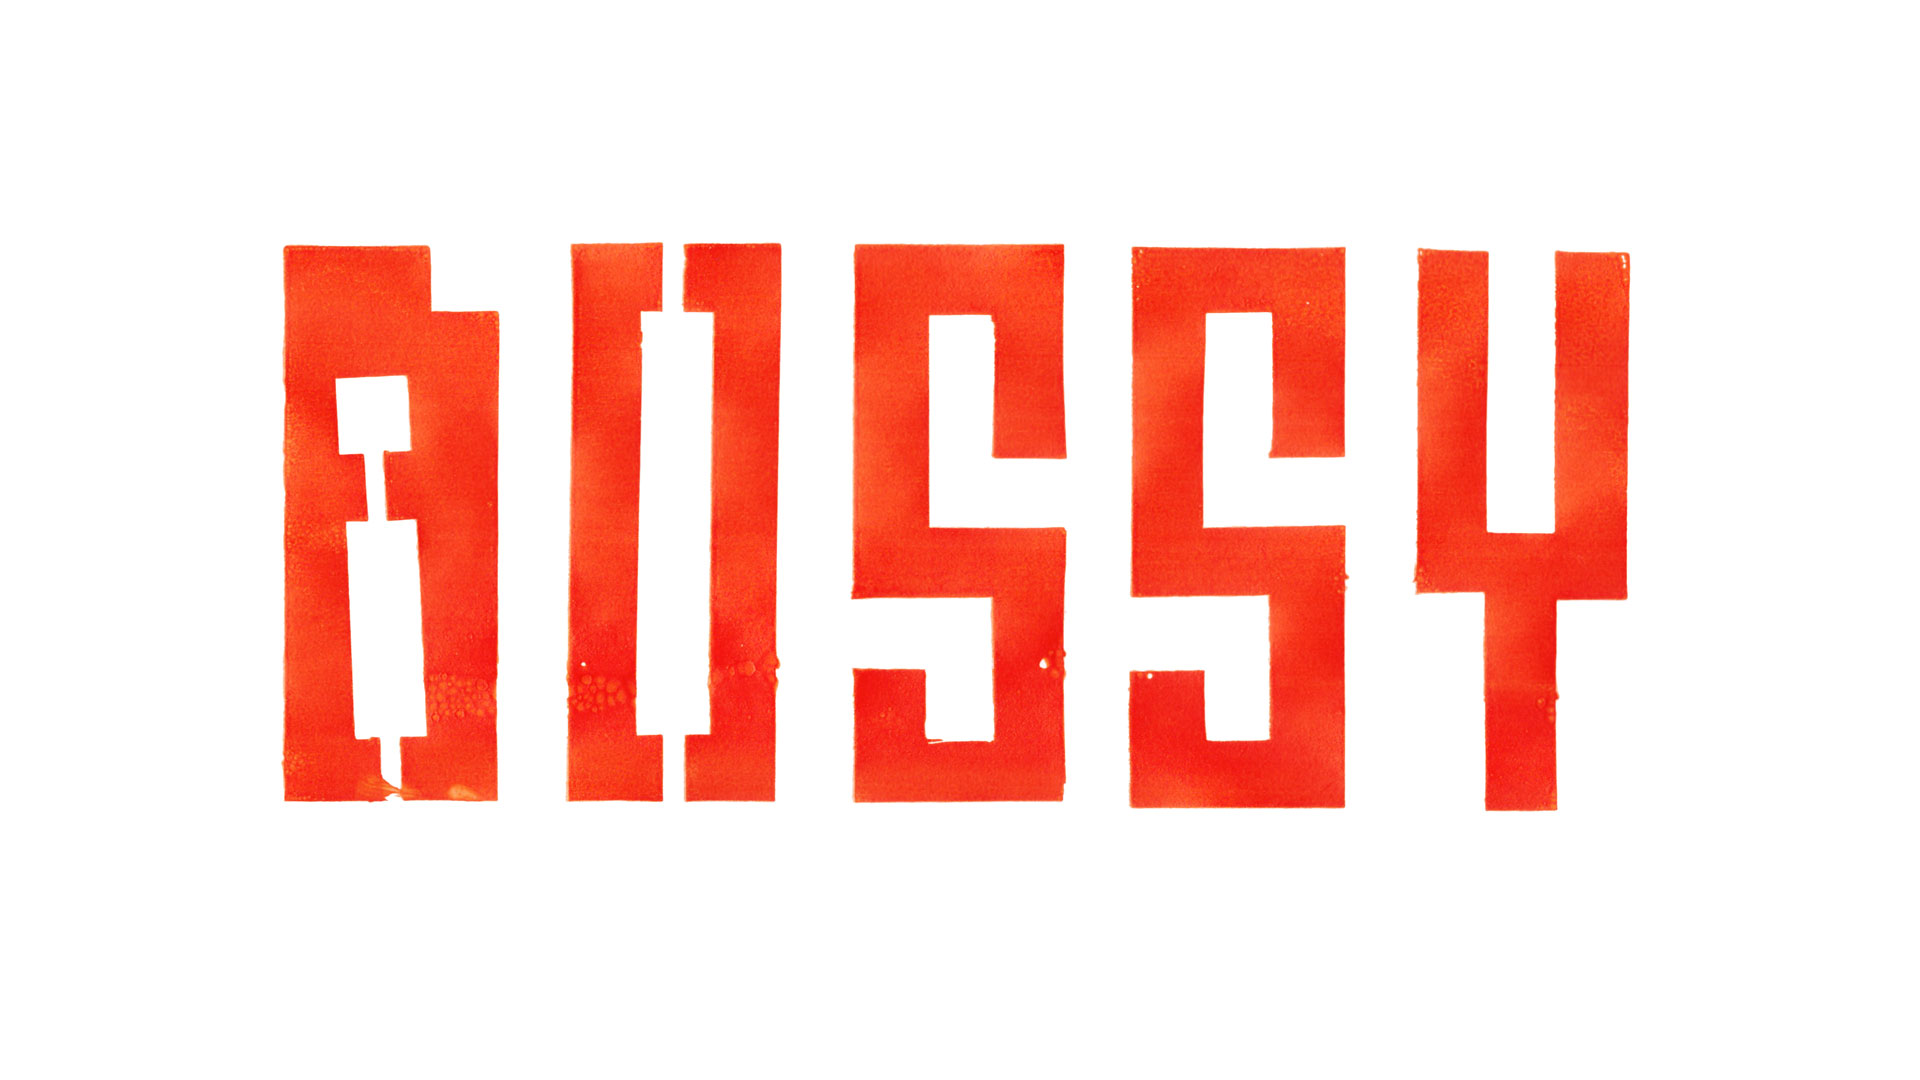 Screenprint depicting the word 'Bossy' in a large, chunky, uppercase stencil-style lettering. The word is in bright orange ink against a white background.